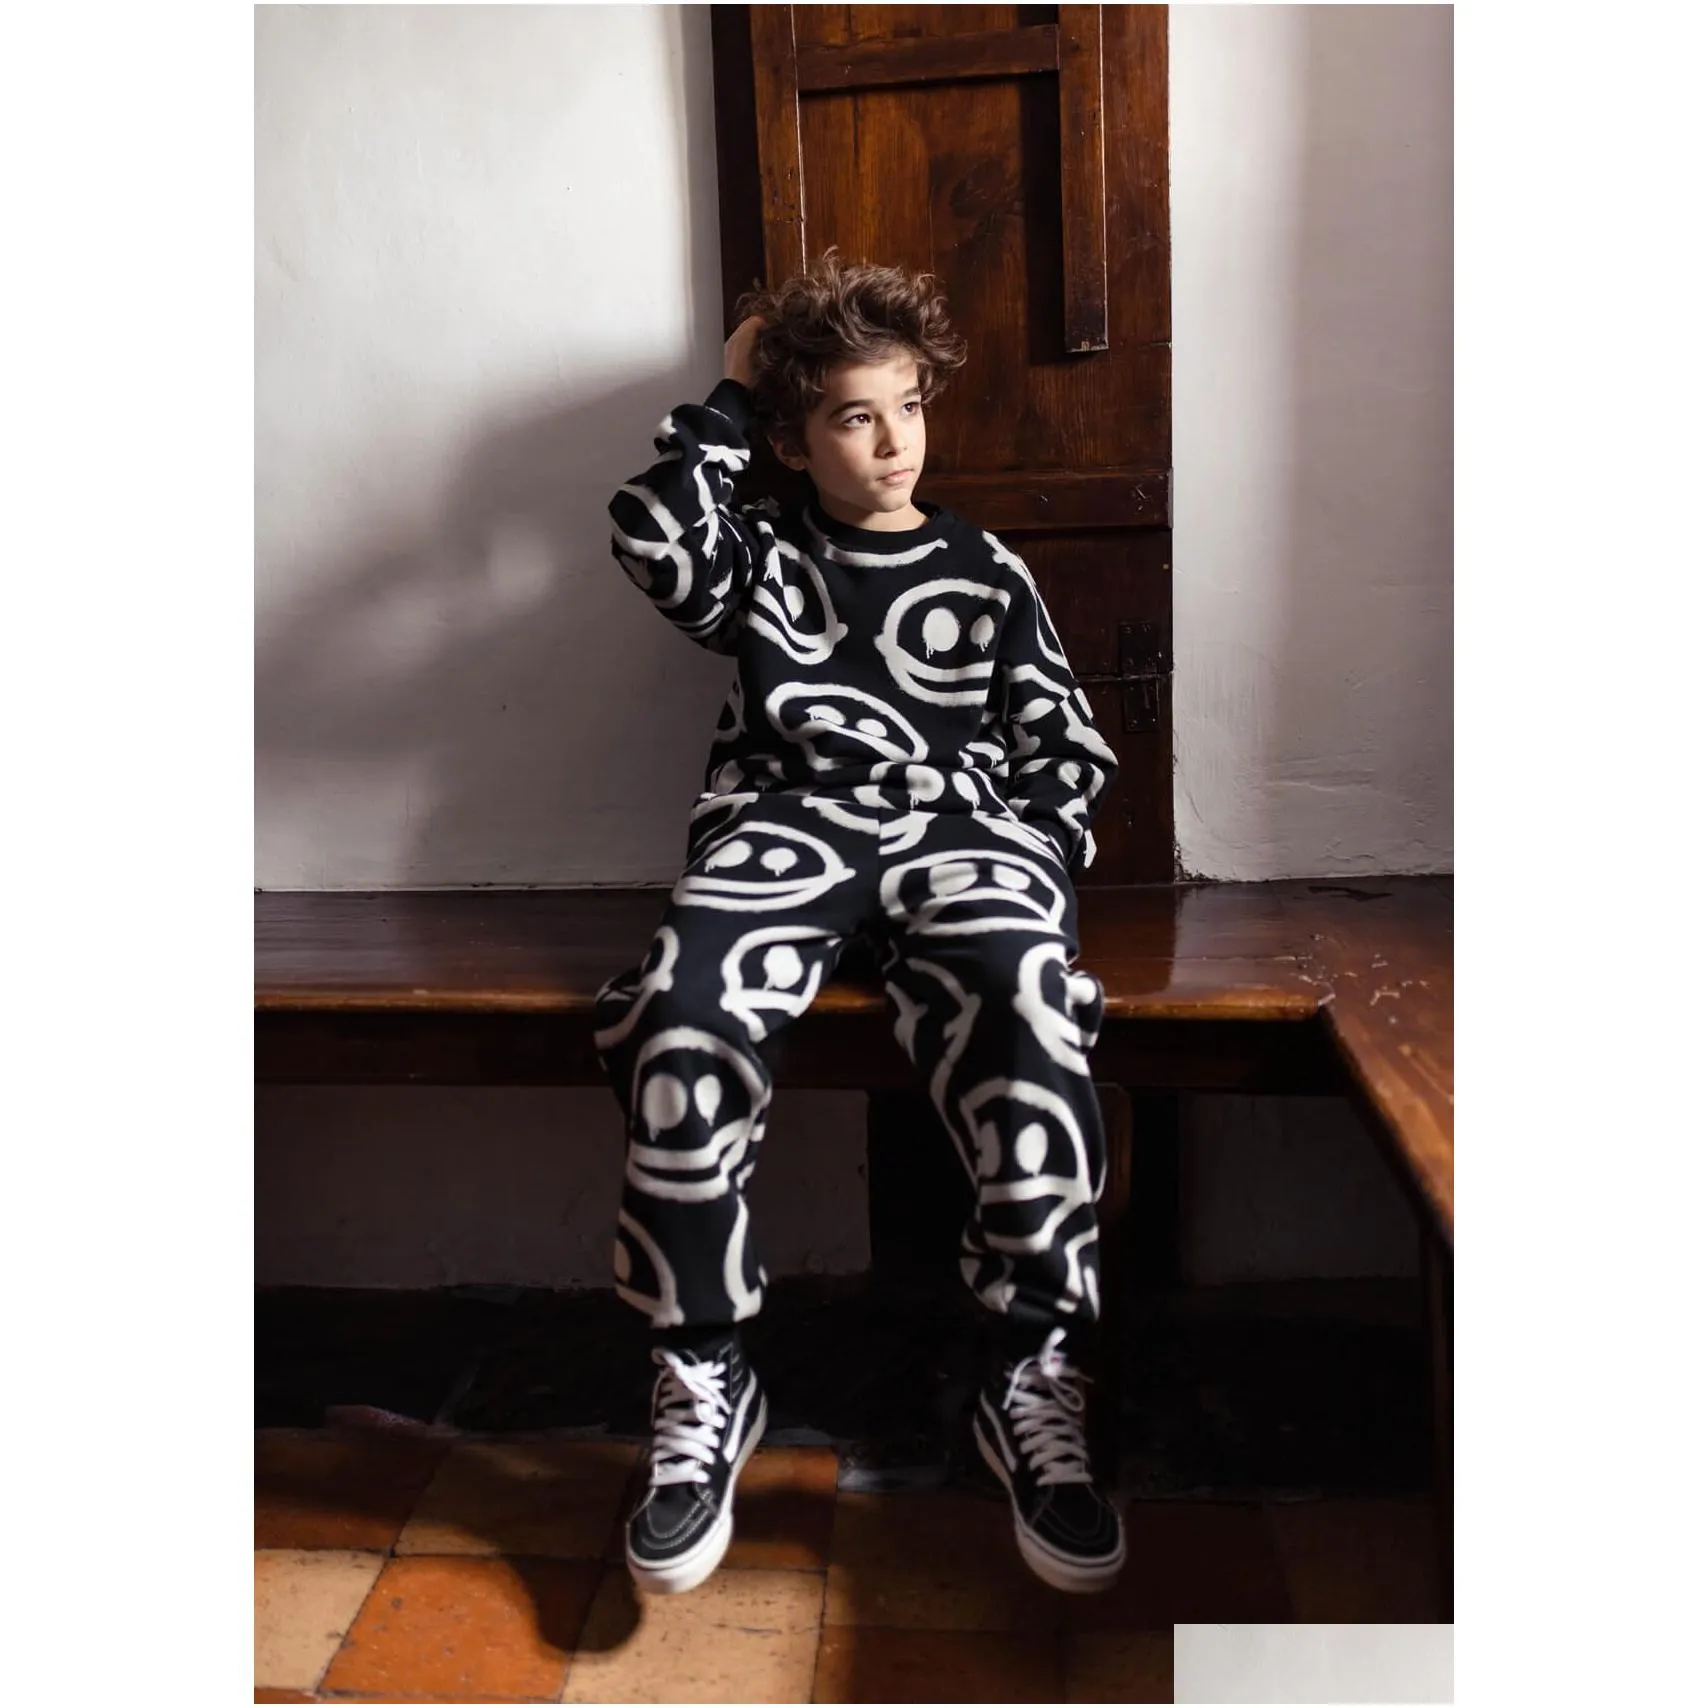 Clothing Sets Autumn/Winter Lmh Childrens Boys/Girls Fleece Hoodie Sweatpants Little Man Happy 230830 Drop Delivery Dh6B1